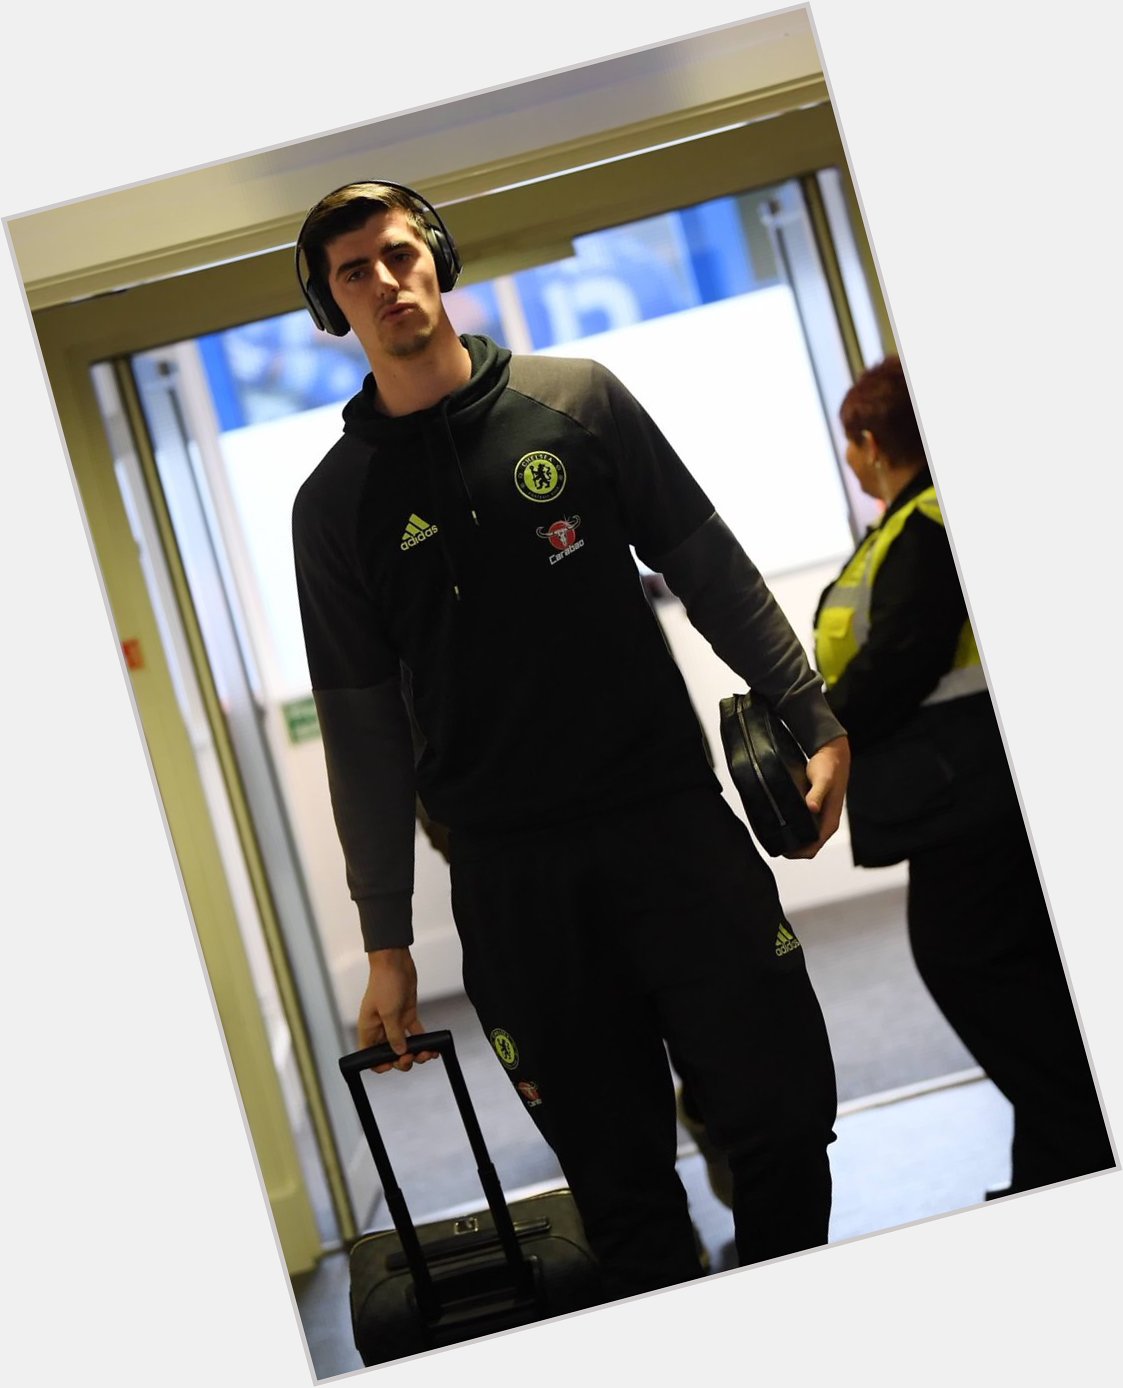 We wan wish Thibaut Courtois very happy 25th birthday today.

Him get 150 career clean sheets. 